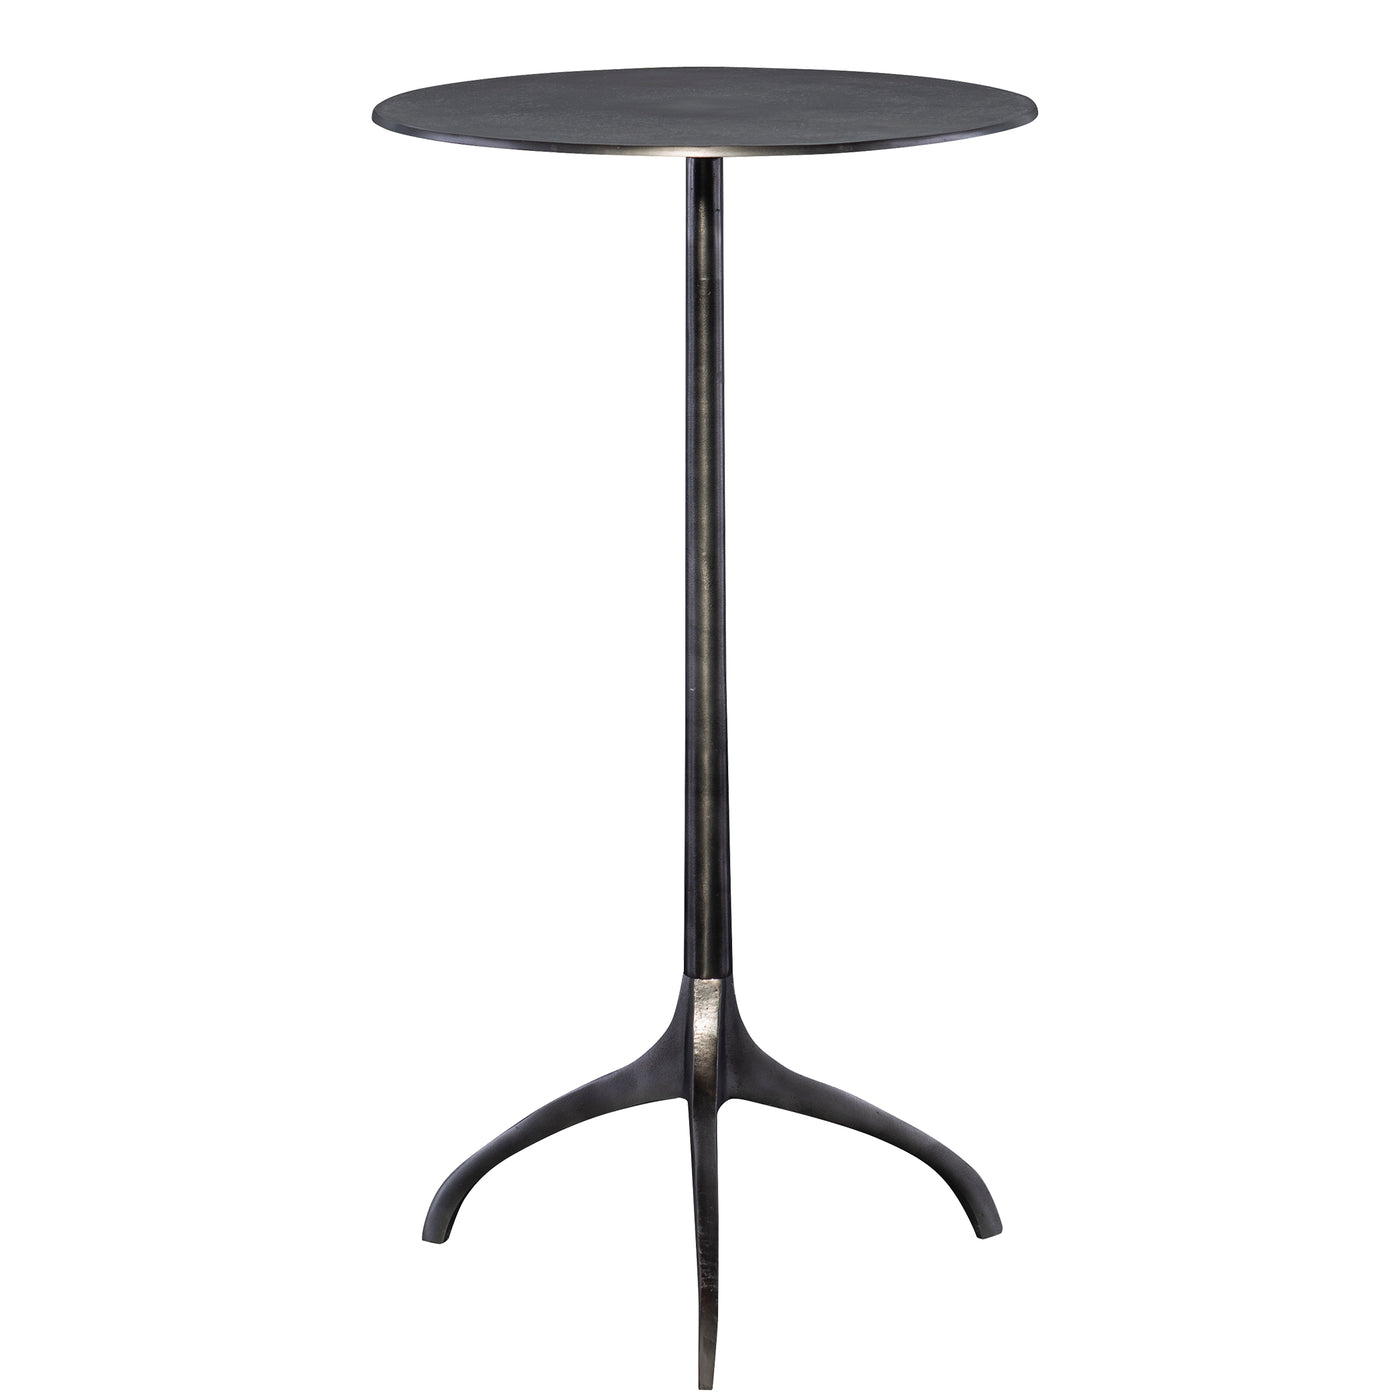 Showcasing Industrial Styling, This Handcrafted Accent Table Features An Solid Cast Aluminum Construction With A Tripod Ba...